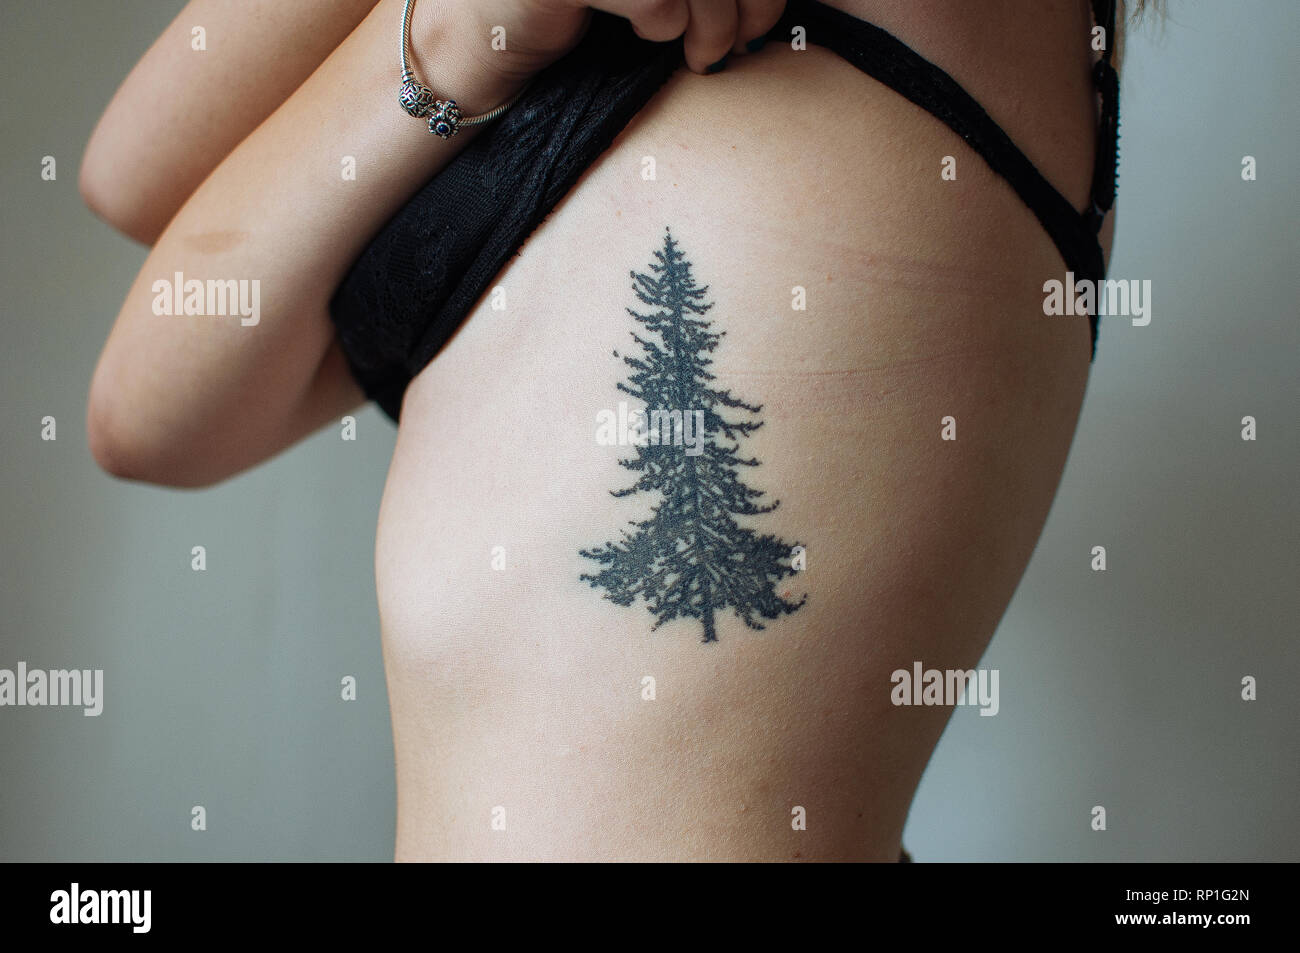 Art project about tattoos and scars. Stock Photo